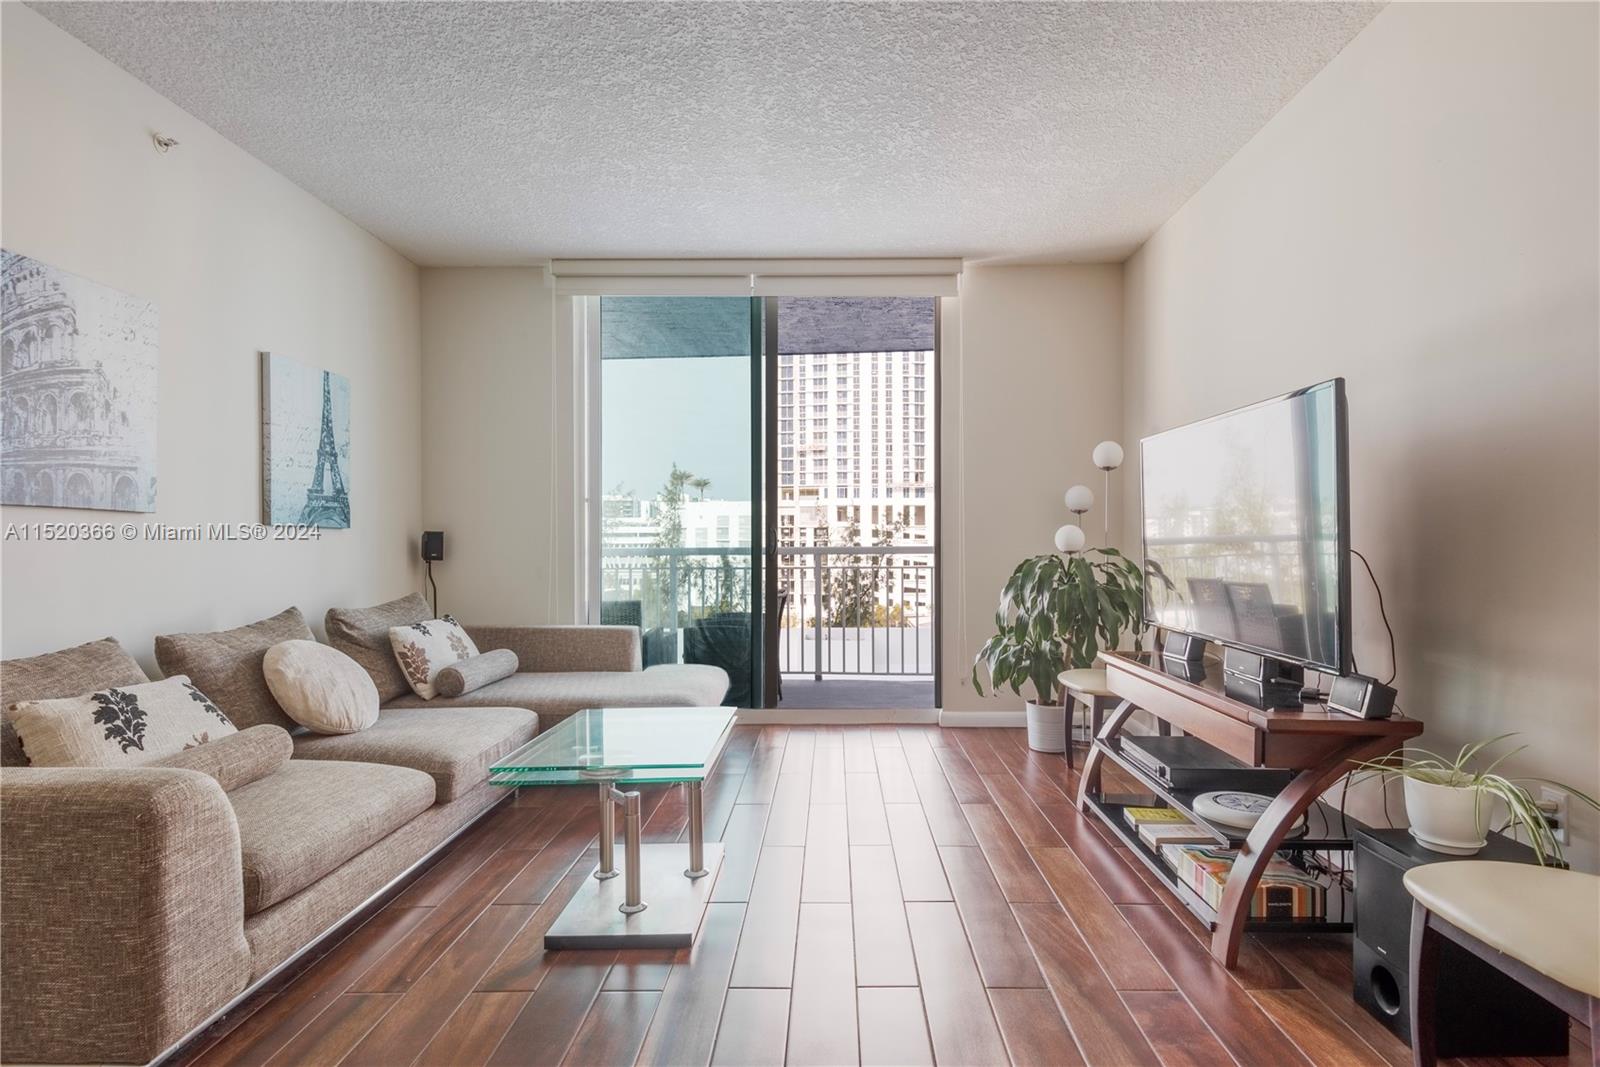 Introducing a stunning 2 bed, 2 bath corner unit at 275 Northeast 18th Street, Unit 702, Miami, FL. Spanning 1051 square feet, this bright home boasts two open balconies with sunrise and sunset views. Enjoy ceramic tile floors, stainless steel appliances, washer/dryer in unit, and a 2018 A/C unit. Building amenities include a newly renovated gym, pool, jacuzzi, gated garage, and 24-hour concierge. Located near Margaret Pace Park and just minutes from downtown Miami, Brickell, and the beaches. Furnished option available. Don't miss the chance to experience luxury living in Wynwood/Edgewater. Schedule a viewing today!